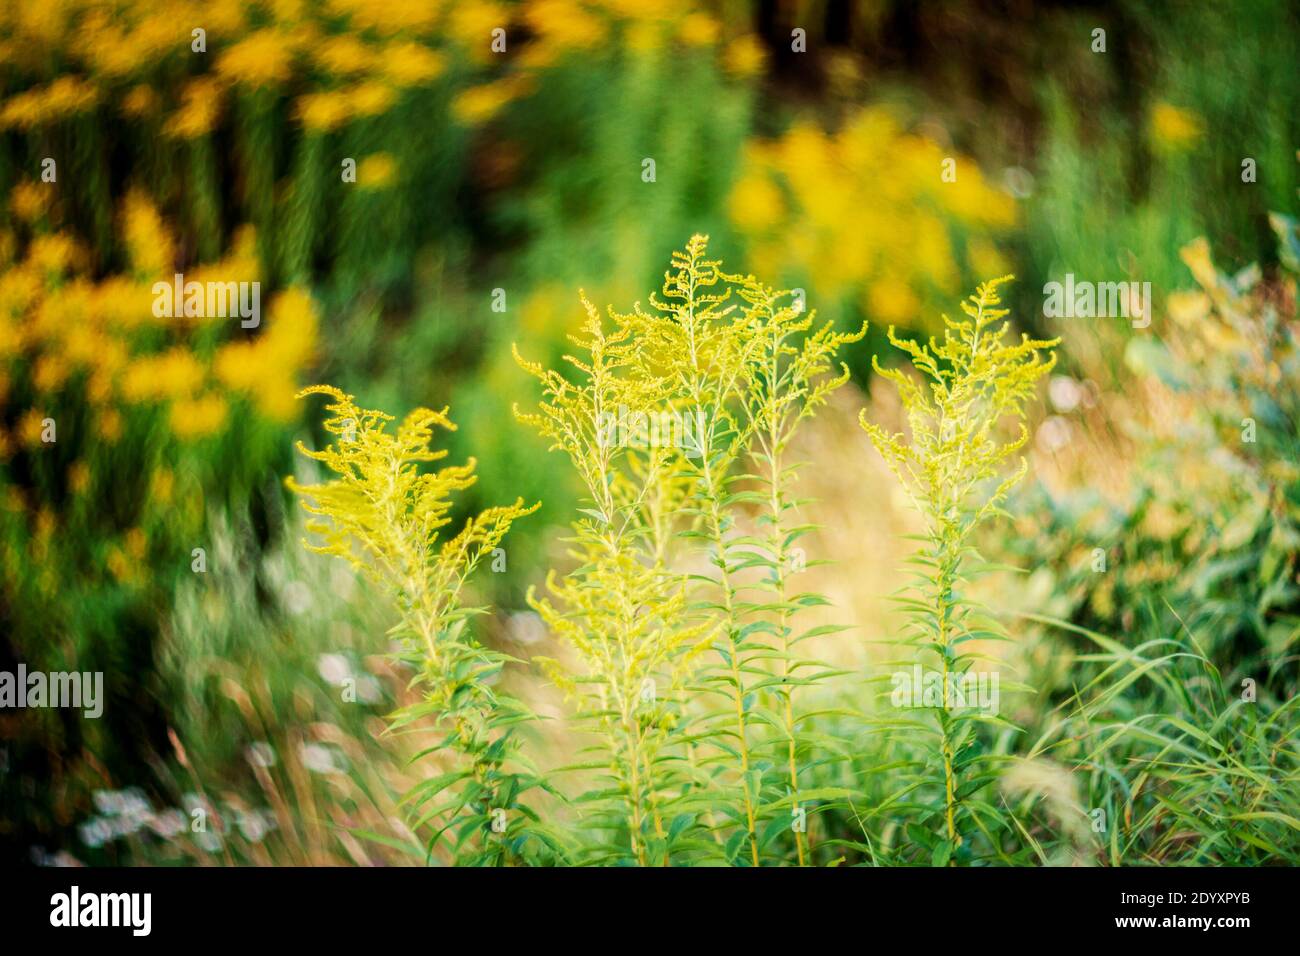 Blooming goldenrod (Solidago altissima) in sunset with low dof, soft focus lens Stock Photo